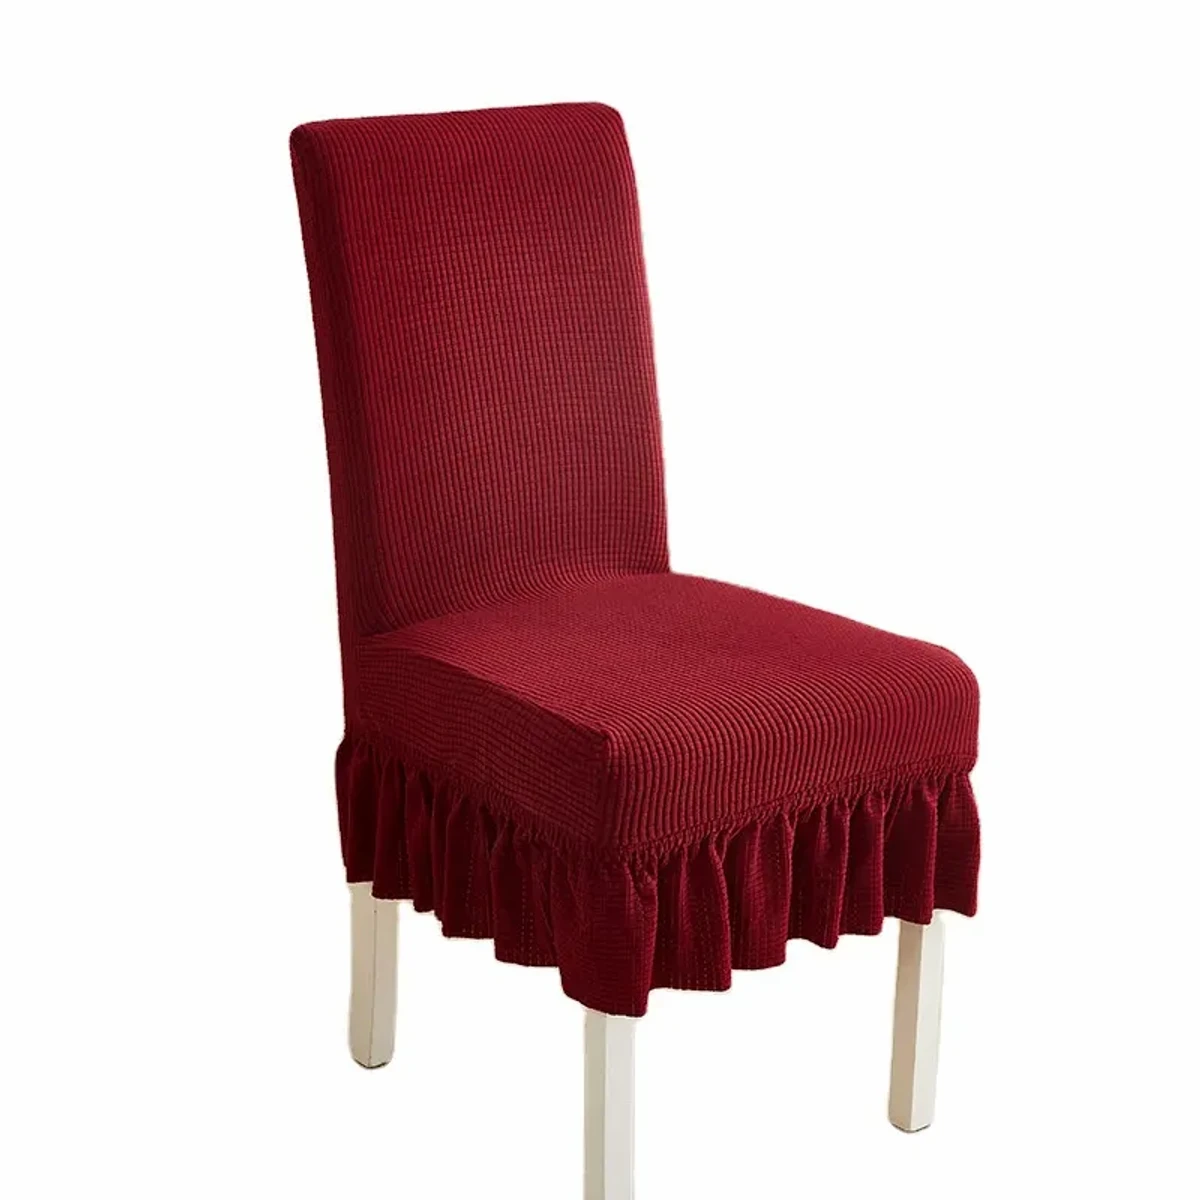 Solid Color Chair Covers Decoration Chair Cover for Dining Room Seat (meron colour)